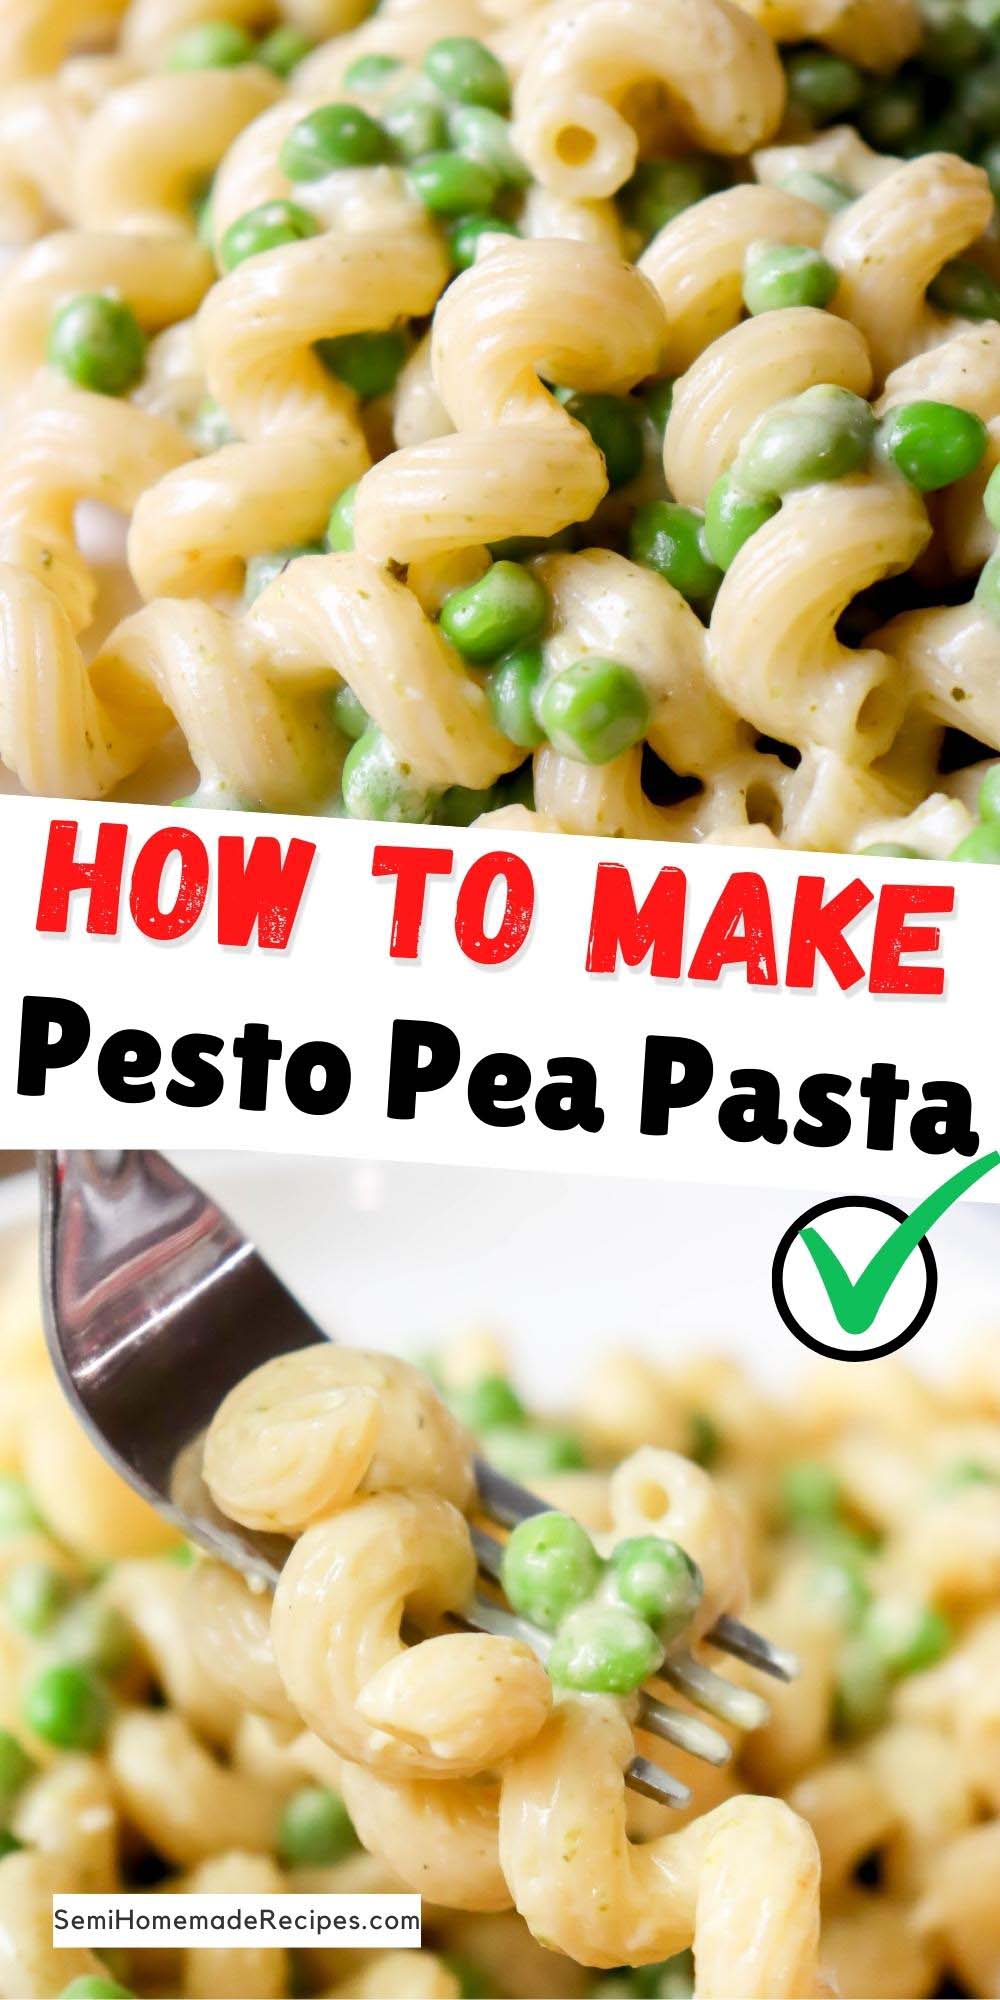 This Pesto Pea Pasta is ready in until 30 minutes and it's a super wonderful and flavorful meal! This 5 ingredients recipe is semi homemade too, so there is not a lot of work to make this meal come to life! 